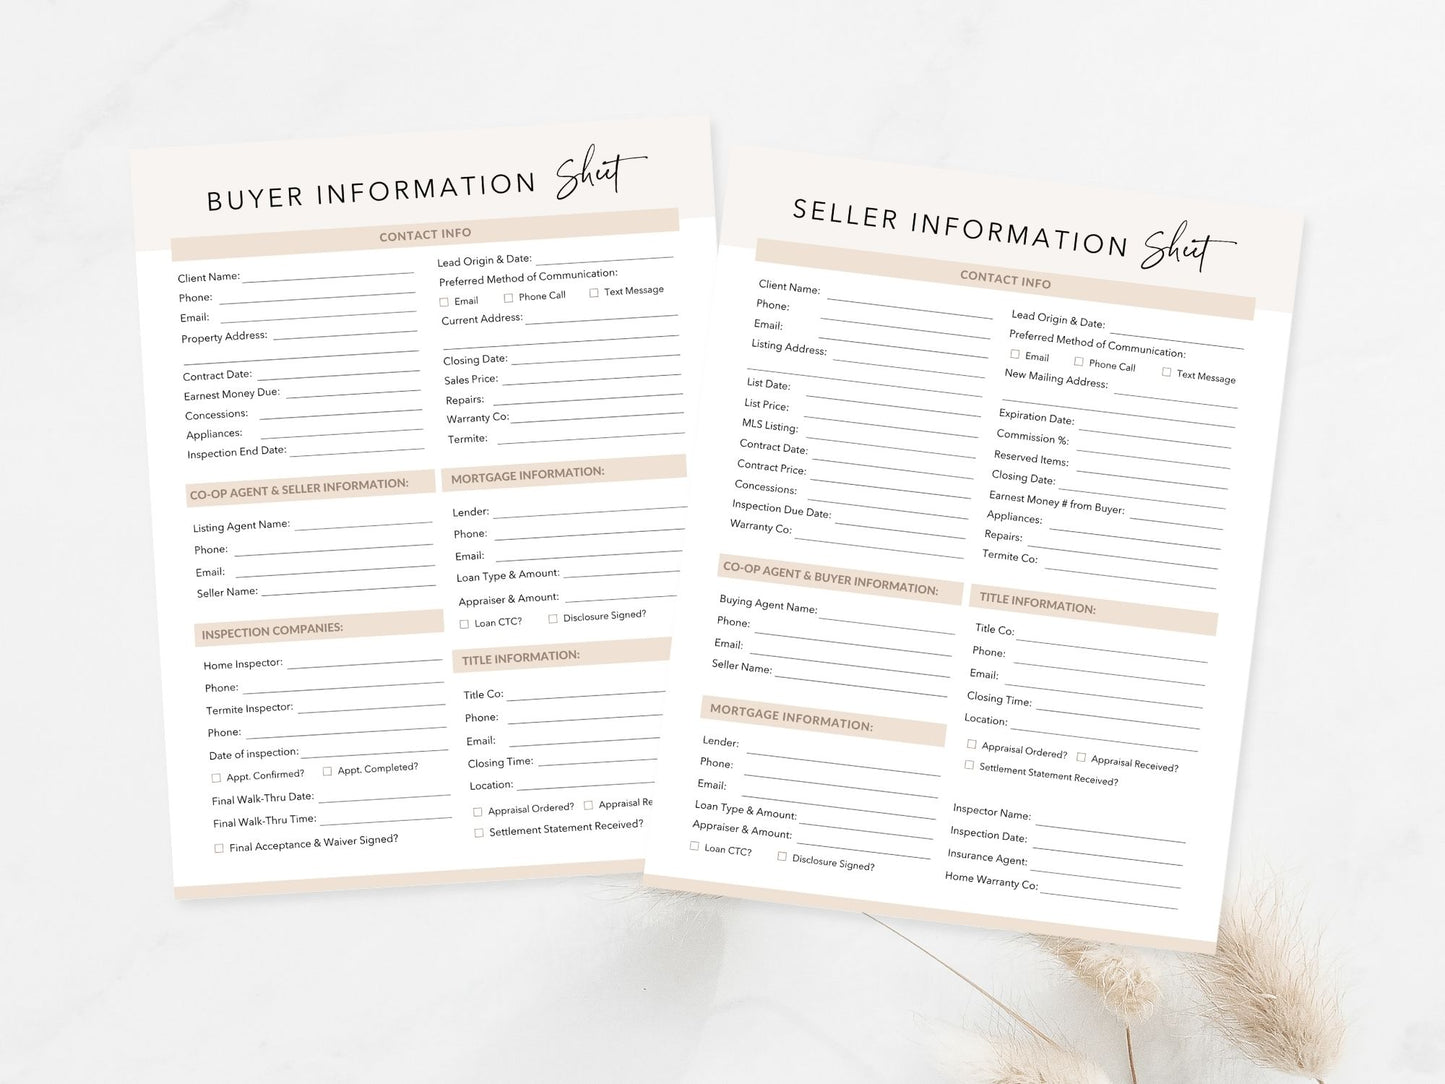 Real Estate Buyer & Seller Information Sheet - Editable template for gathering essential details from both buyers and sellers in the real estate transaction process.